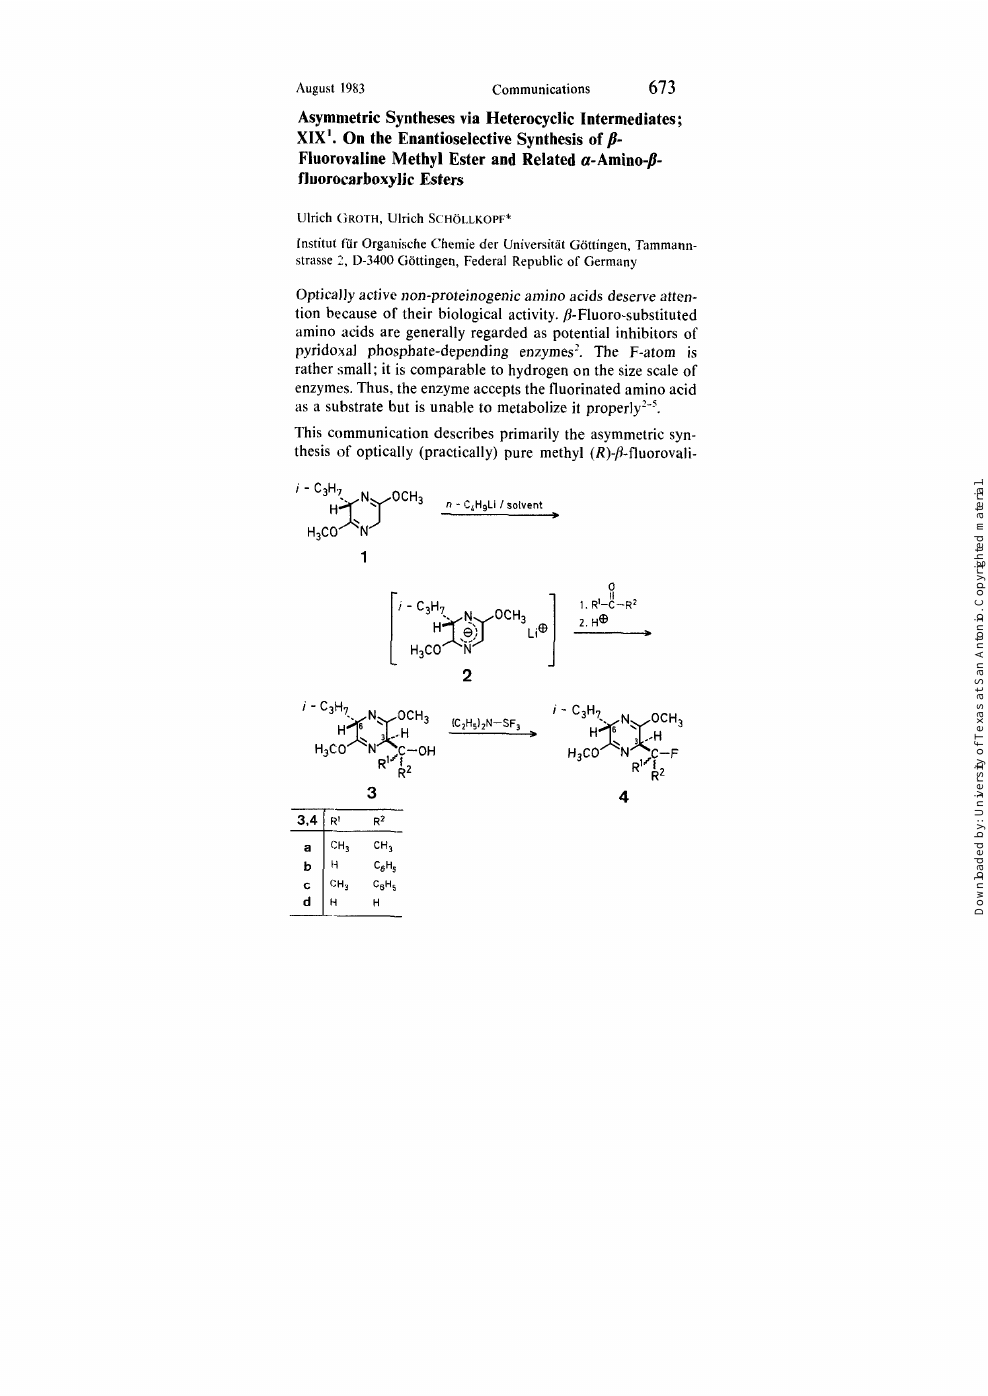 Asymmetric Syntheses Via Heterocyclic Intermediates Xix 1 On The Enantioselective Synthesis Of B Fluorovaline Methyl Ester And Related A Amino B Fluorocarboxylic Esters Topic Of Research Paper In Chemical Sciences Download Scholarly Article Pdf